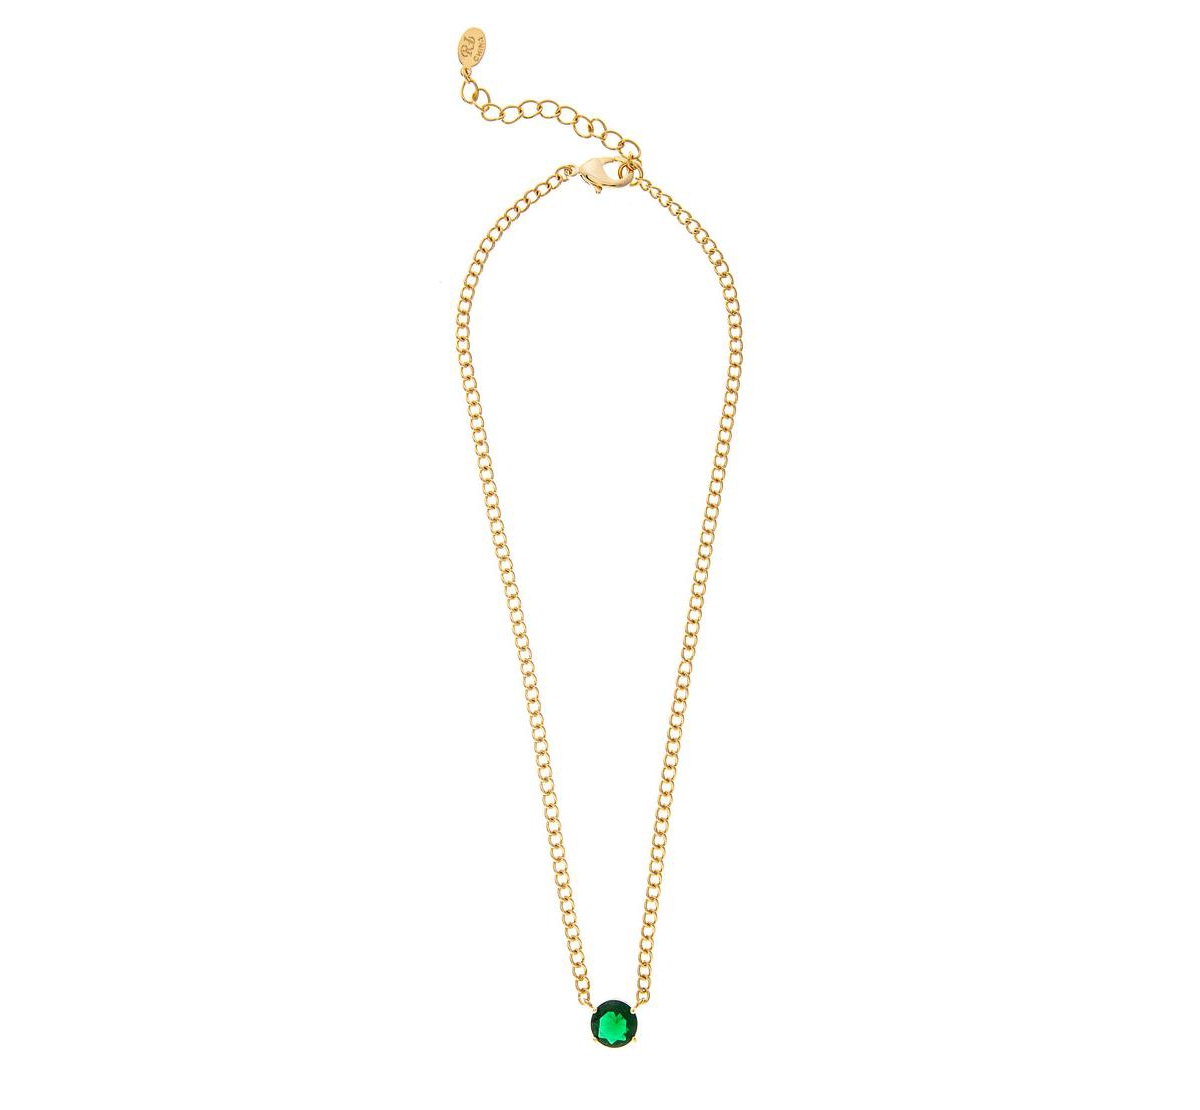 Emerald Crystal Solitaire Pendant Necklace - Gold with green crystal